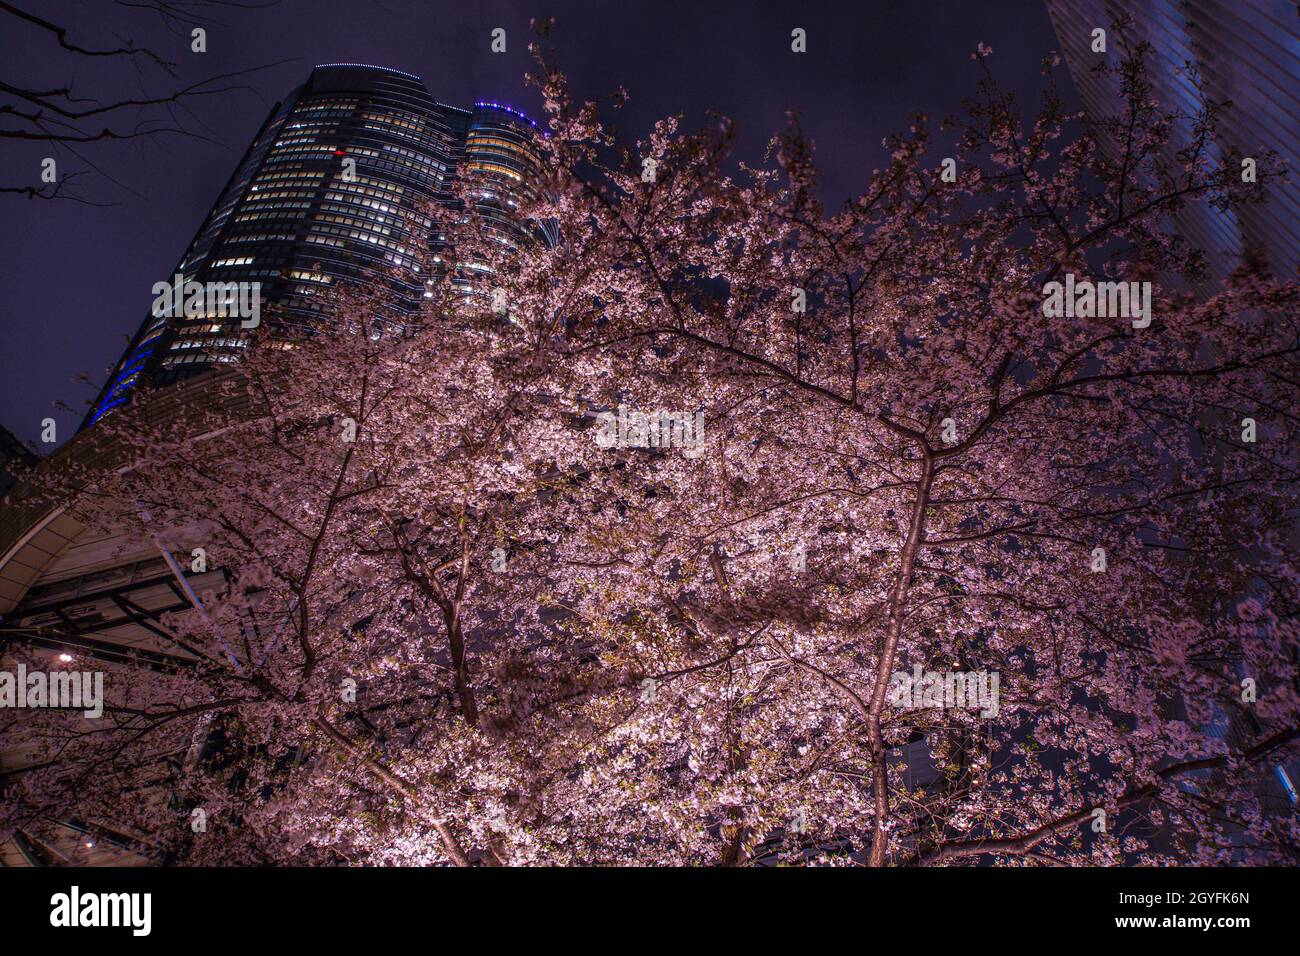 Of going to see cherry blossoms at night of Roppongi full bloom. Shooting Location: Tokyo metropolitan area Stock Photo